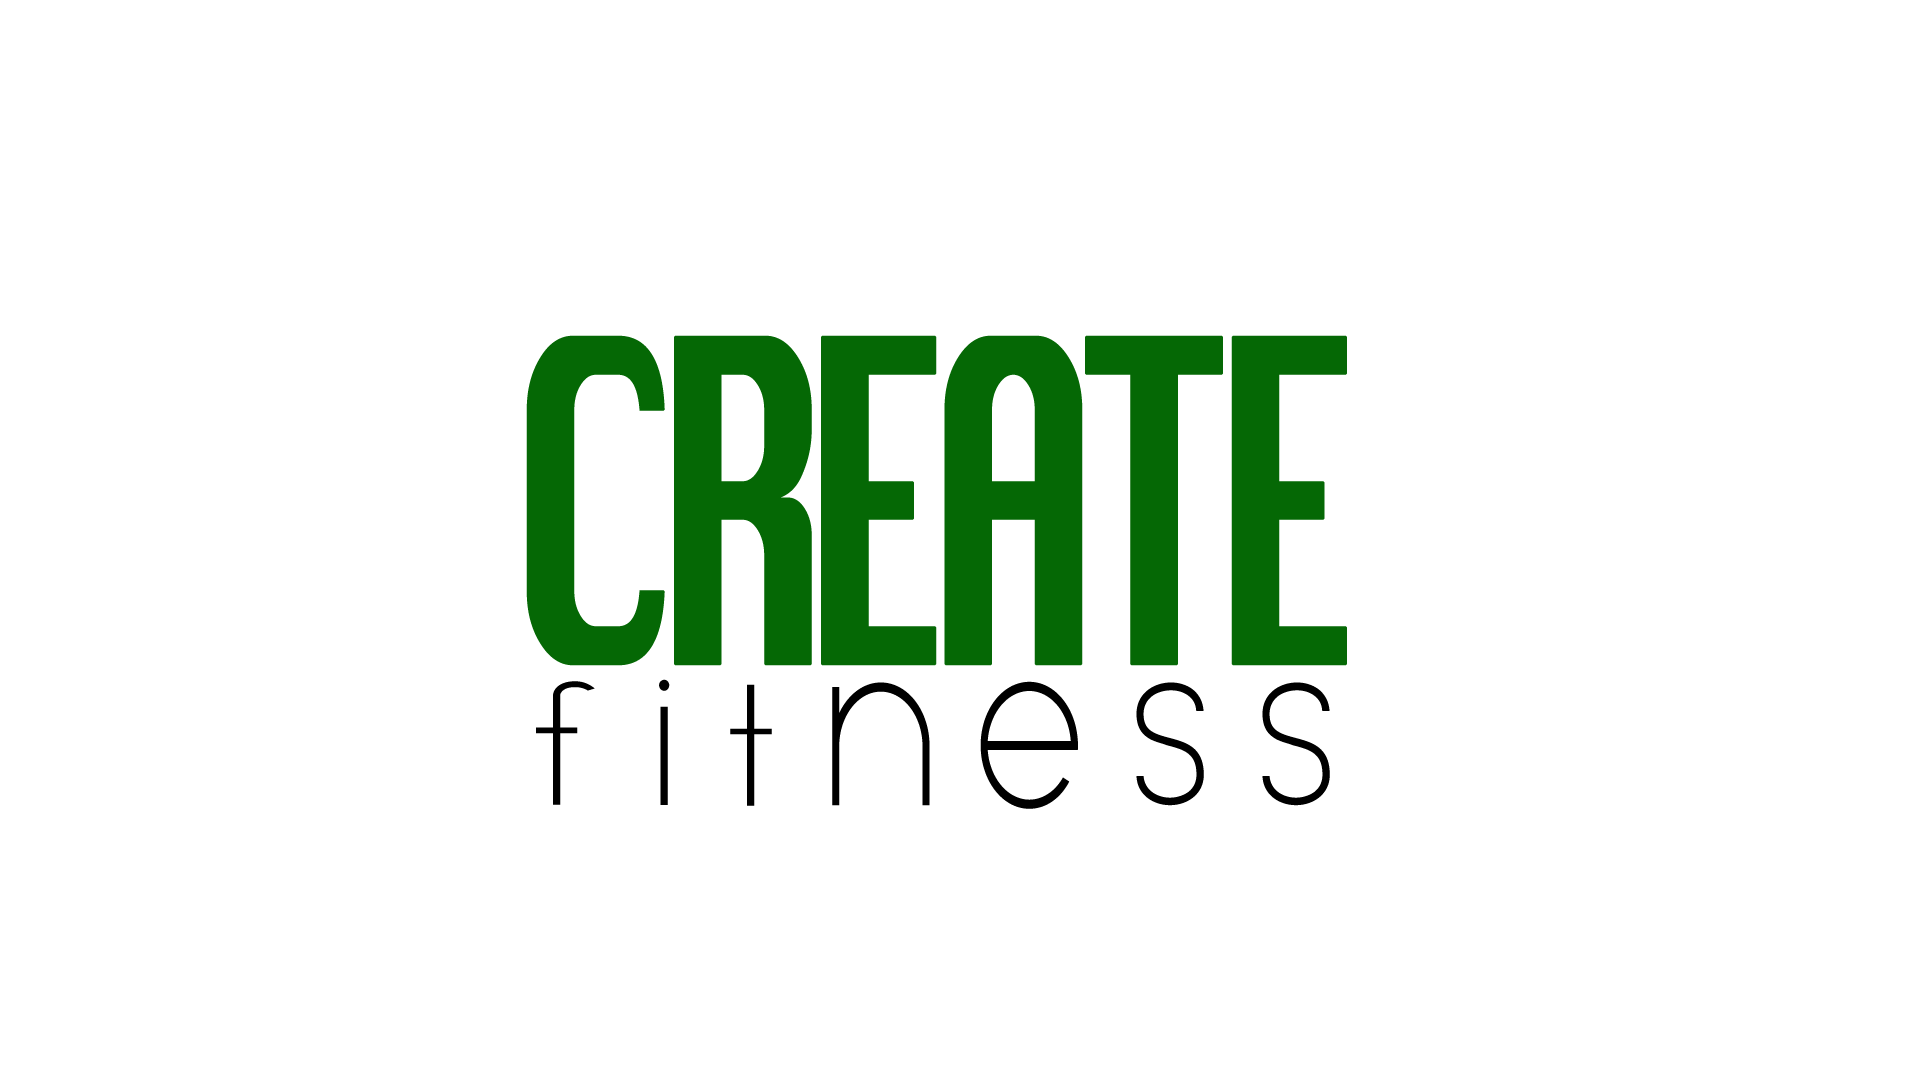 Create Fitness Highlights the Benefits of Personal Coach Training